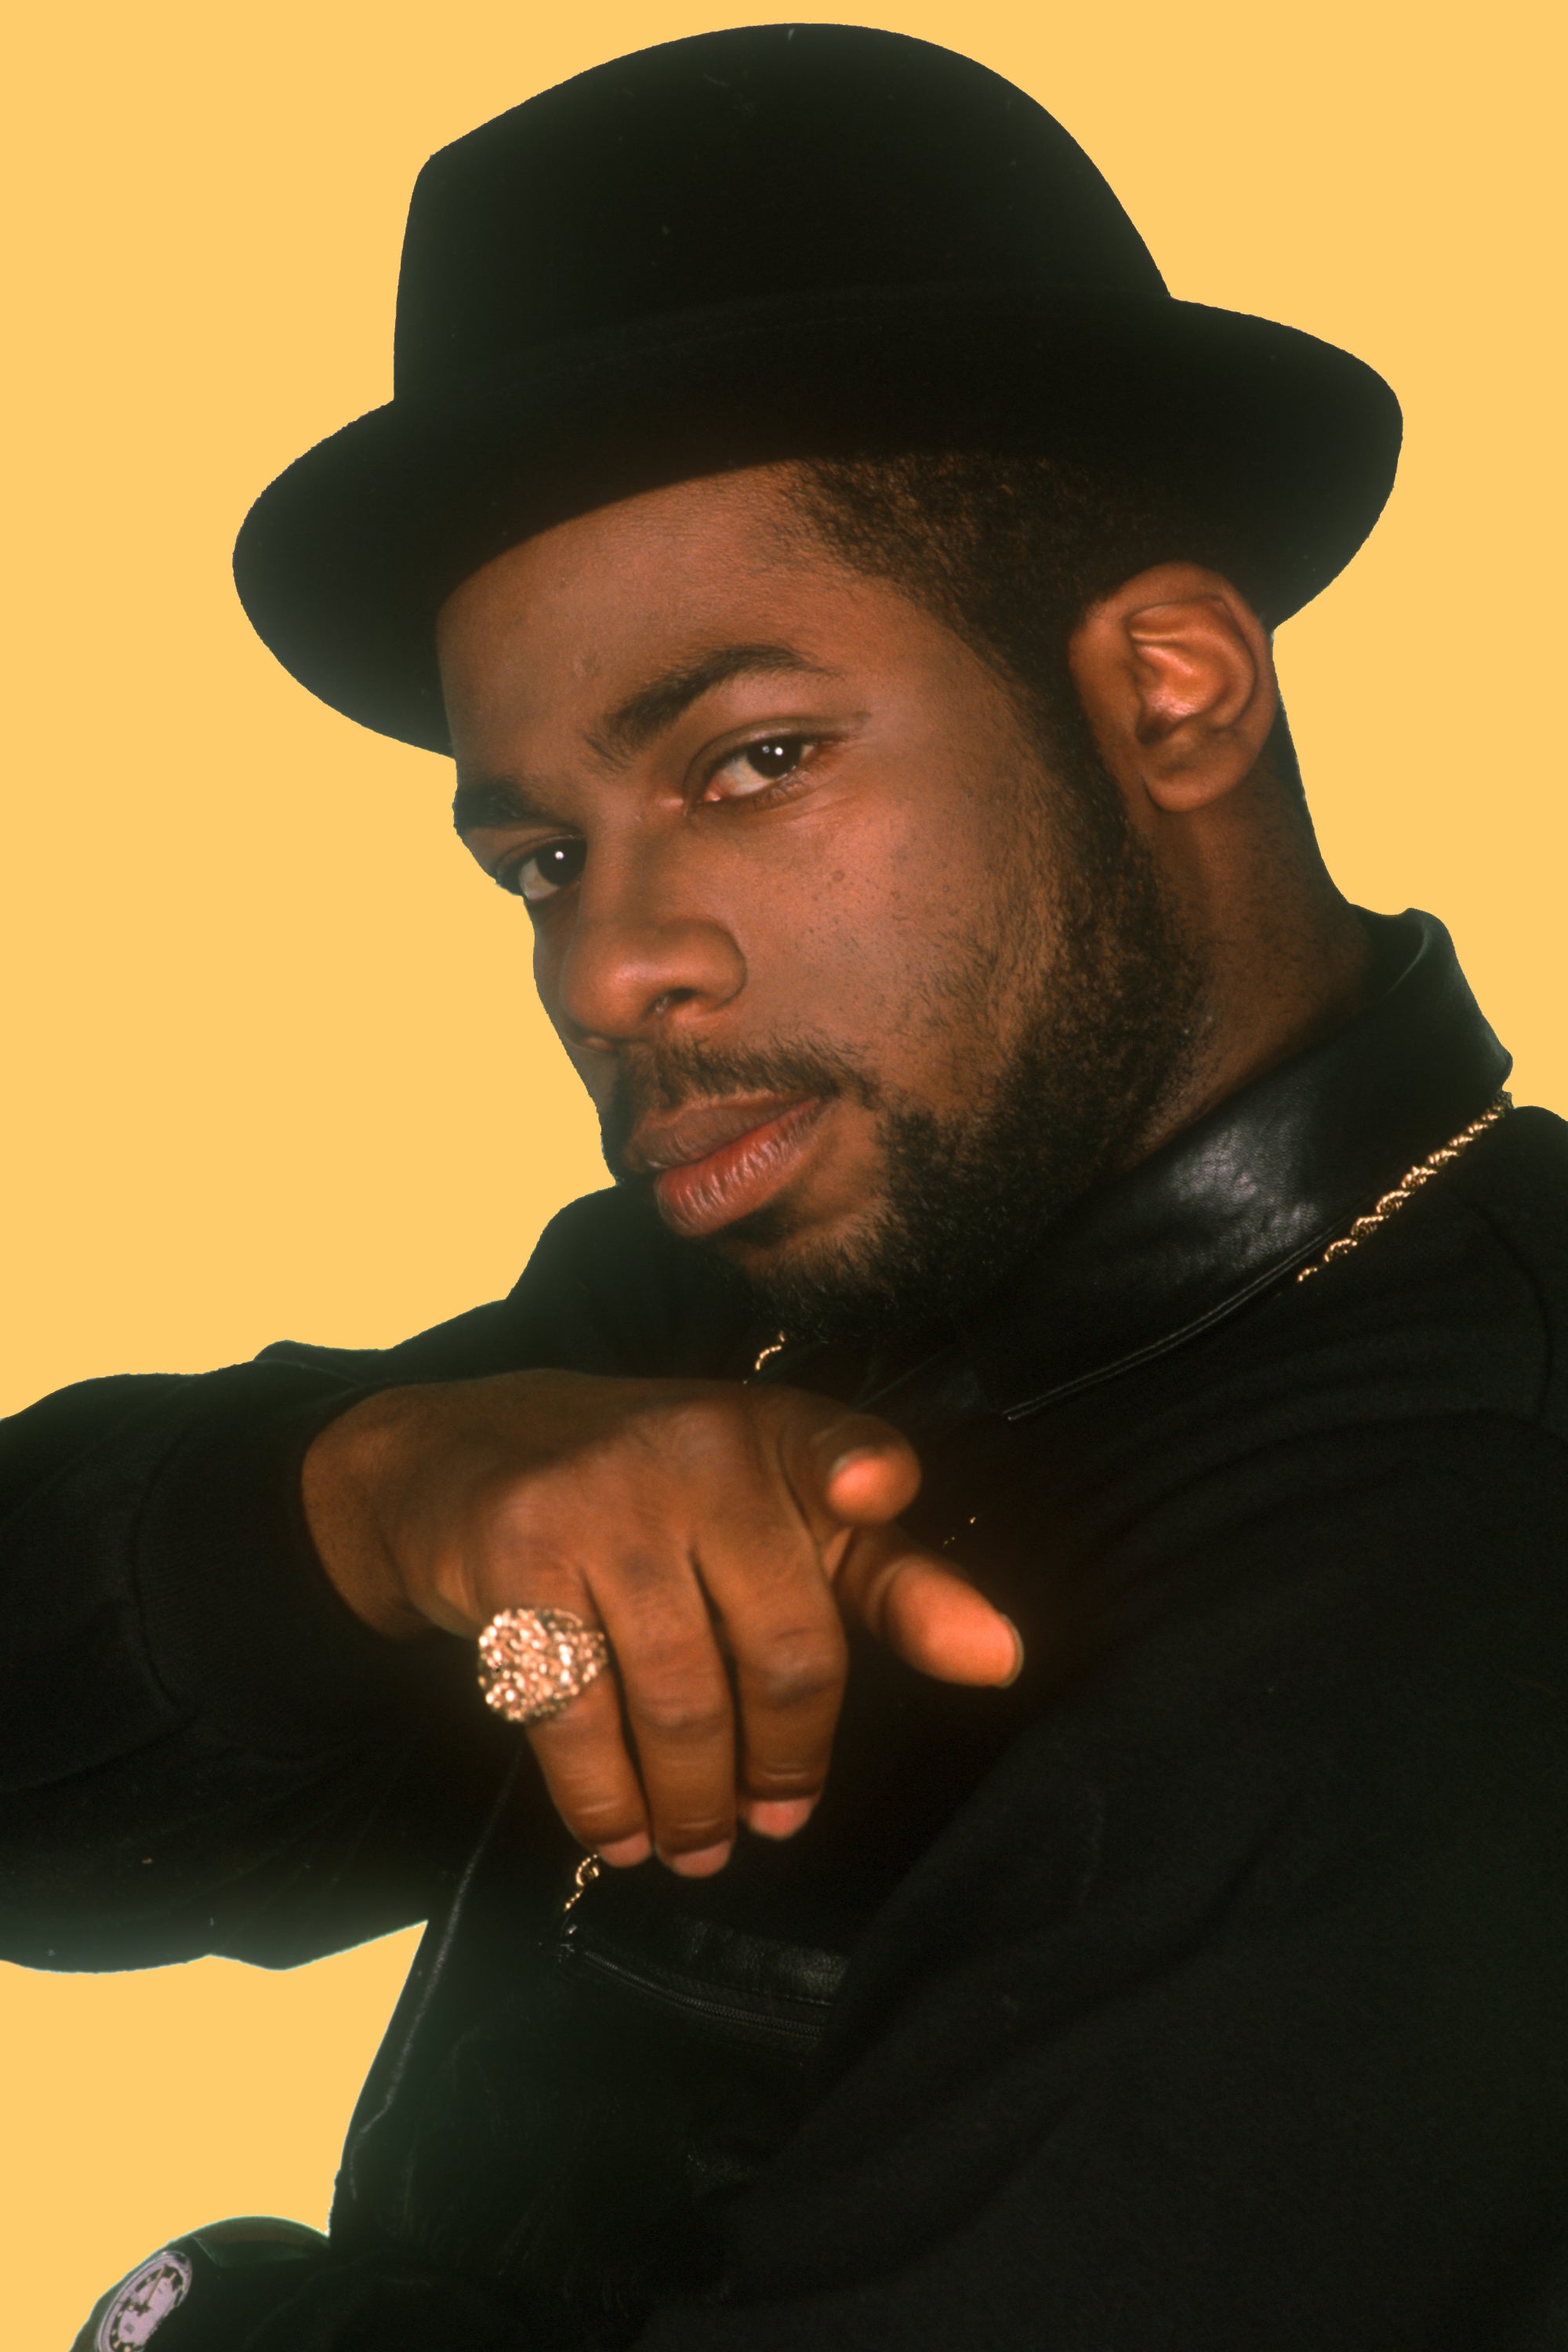 The Quick Read: Jam Master Jay's Murder Officially Ruled A Cold Case
